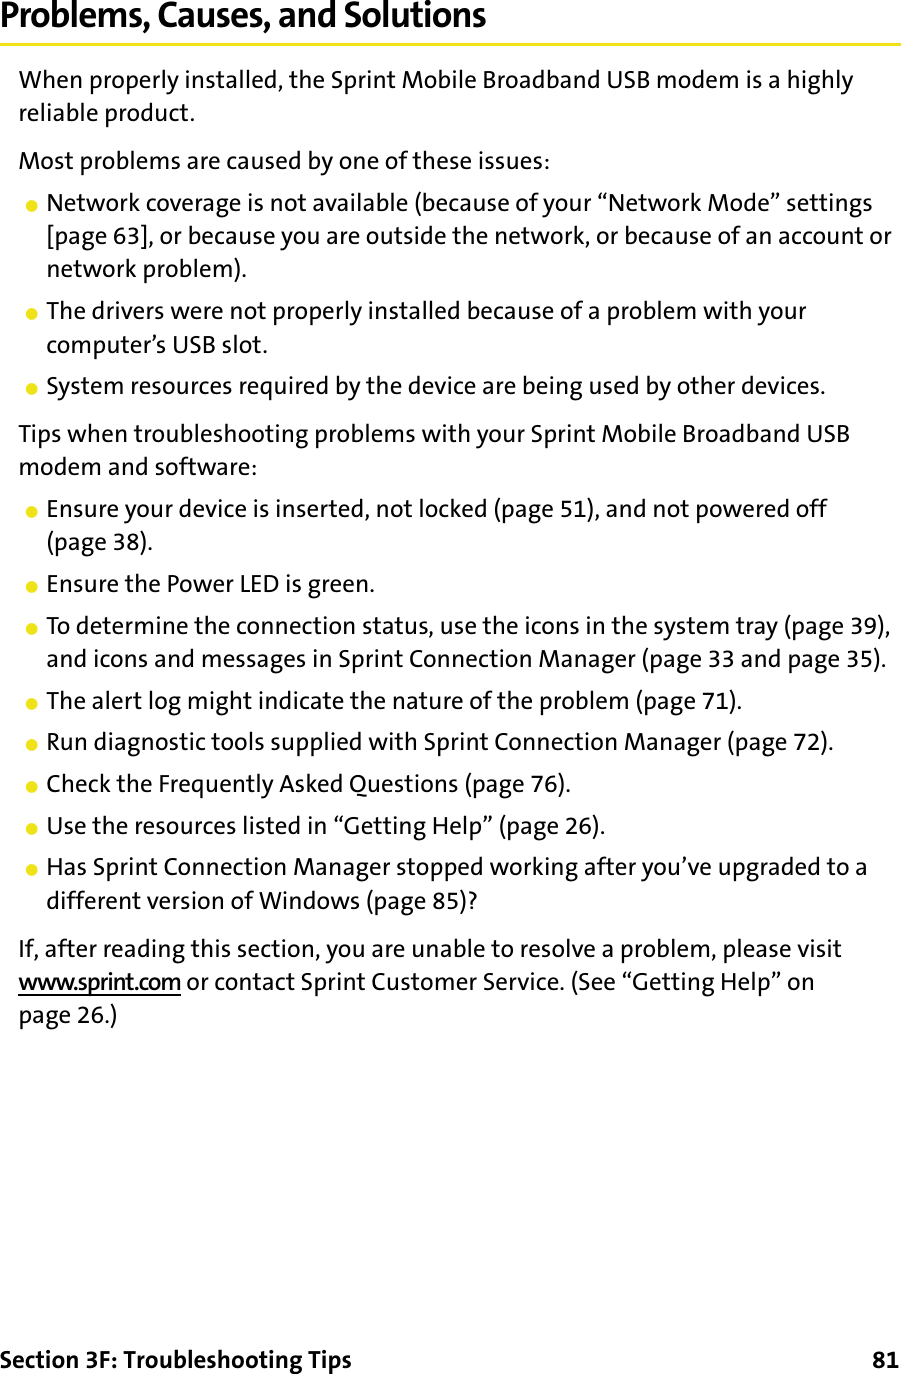 Section 3F: Troubleshooting Tips      81Problems, Causes, and SolutionsWhen properly installed, the Sprint Mobile Broadband USB modem is a highly reliable product.Most problems are caused by one of these issues:䢇Network coverage is not available (because of your “Network Mode” settings [page 63], or because you are outside the network, or because of an account or network problem).䢇The drivers were not properly installed because of a problem with your computer’s USB slot.䢇System resources required by the device are being used by other devices.Tips when troubleshooting problems with your Sprint Mobile Broadband USB modem and software:䢇Ensure your device is inserted, not locked (page 51), and not powered off (page 38).䢇Ensure the Power LED is green.䢇To determine the connection status, use the icons in the system tray (page 39), and icons and messages in Sprint Connection Manager (page 33 and page 35).䢇The alert log might indicate the nature of the problem (page 71).䢇Run diagnostic tools supplied with Sprint Connection Manager (page 72).䢇Check the Frequently Asked Questions (page 76).䢇Use the resources listed in “Getting Help” (page 26).䢇Has Sprint Connection Manager stopped working after you’ve upgraded to a different version of Windows (page 85)?If, after reading this section, you are unable to resolve a problem, please visit www.sprint.com or contact Sprint Customer Service. (See “Getting Help” on page 26.)